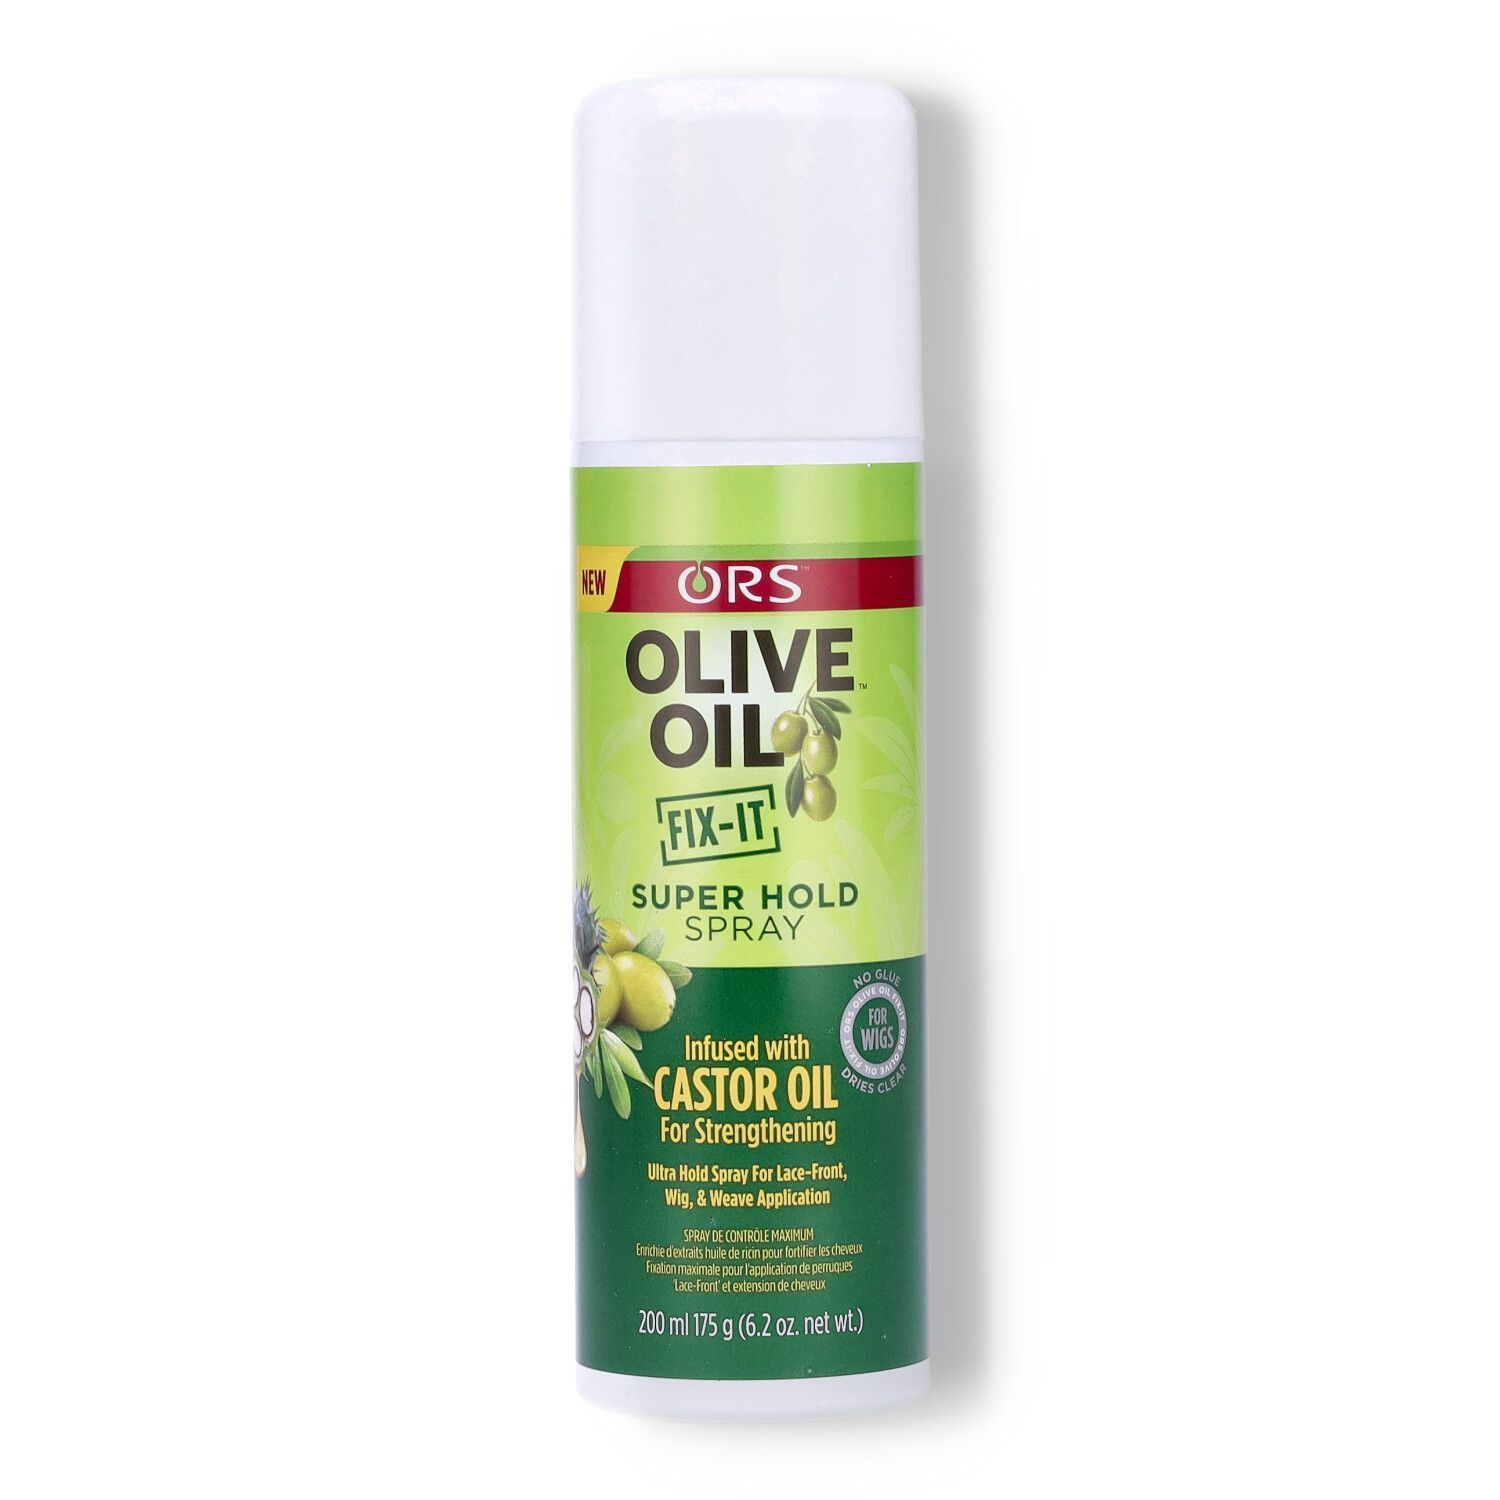 ORS Olive Oil Fix It Super Hold Spray - 6.2oz